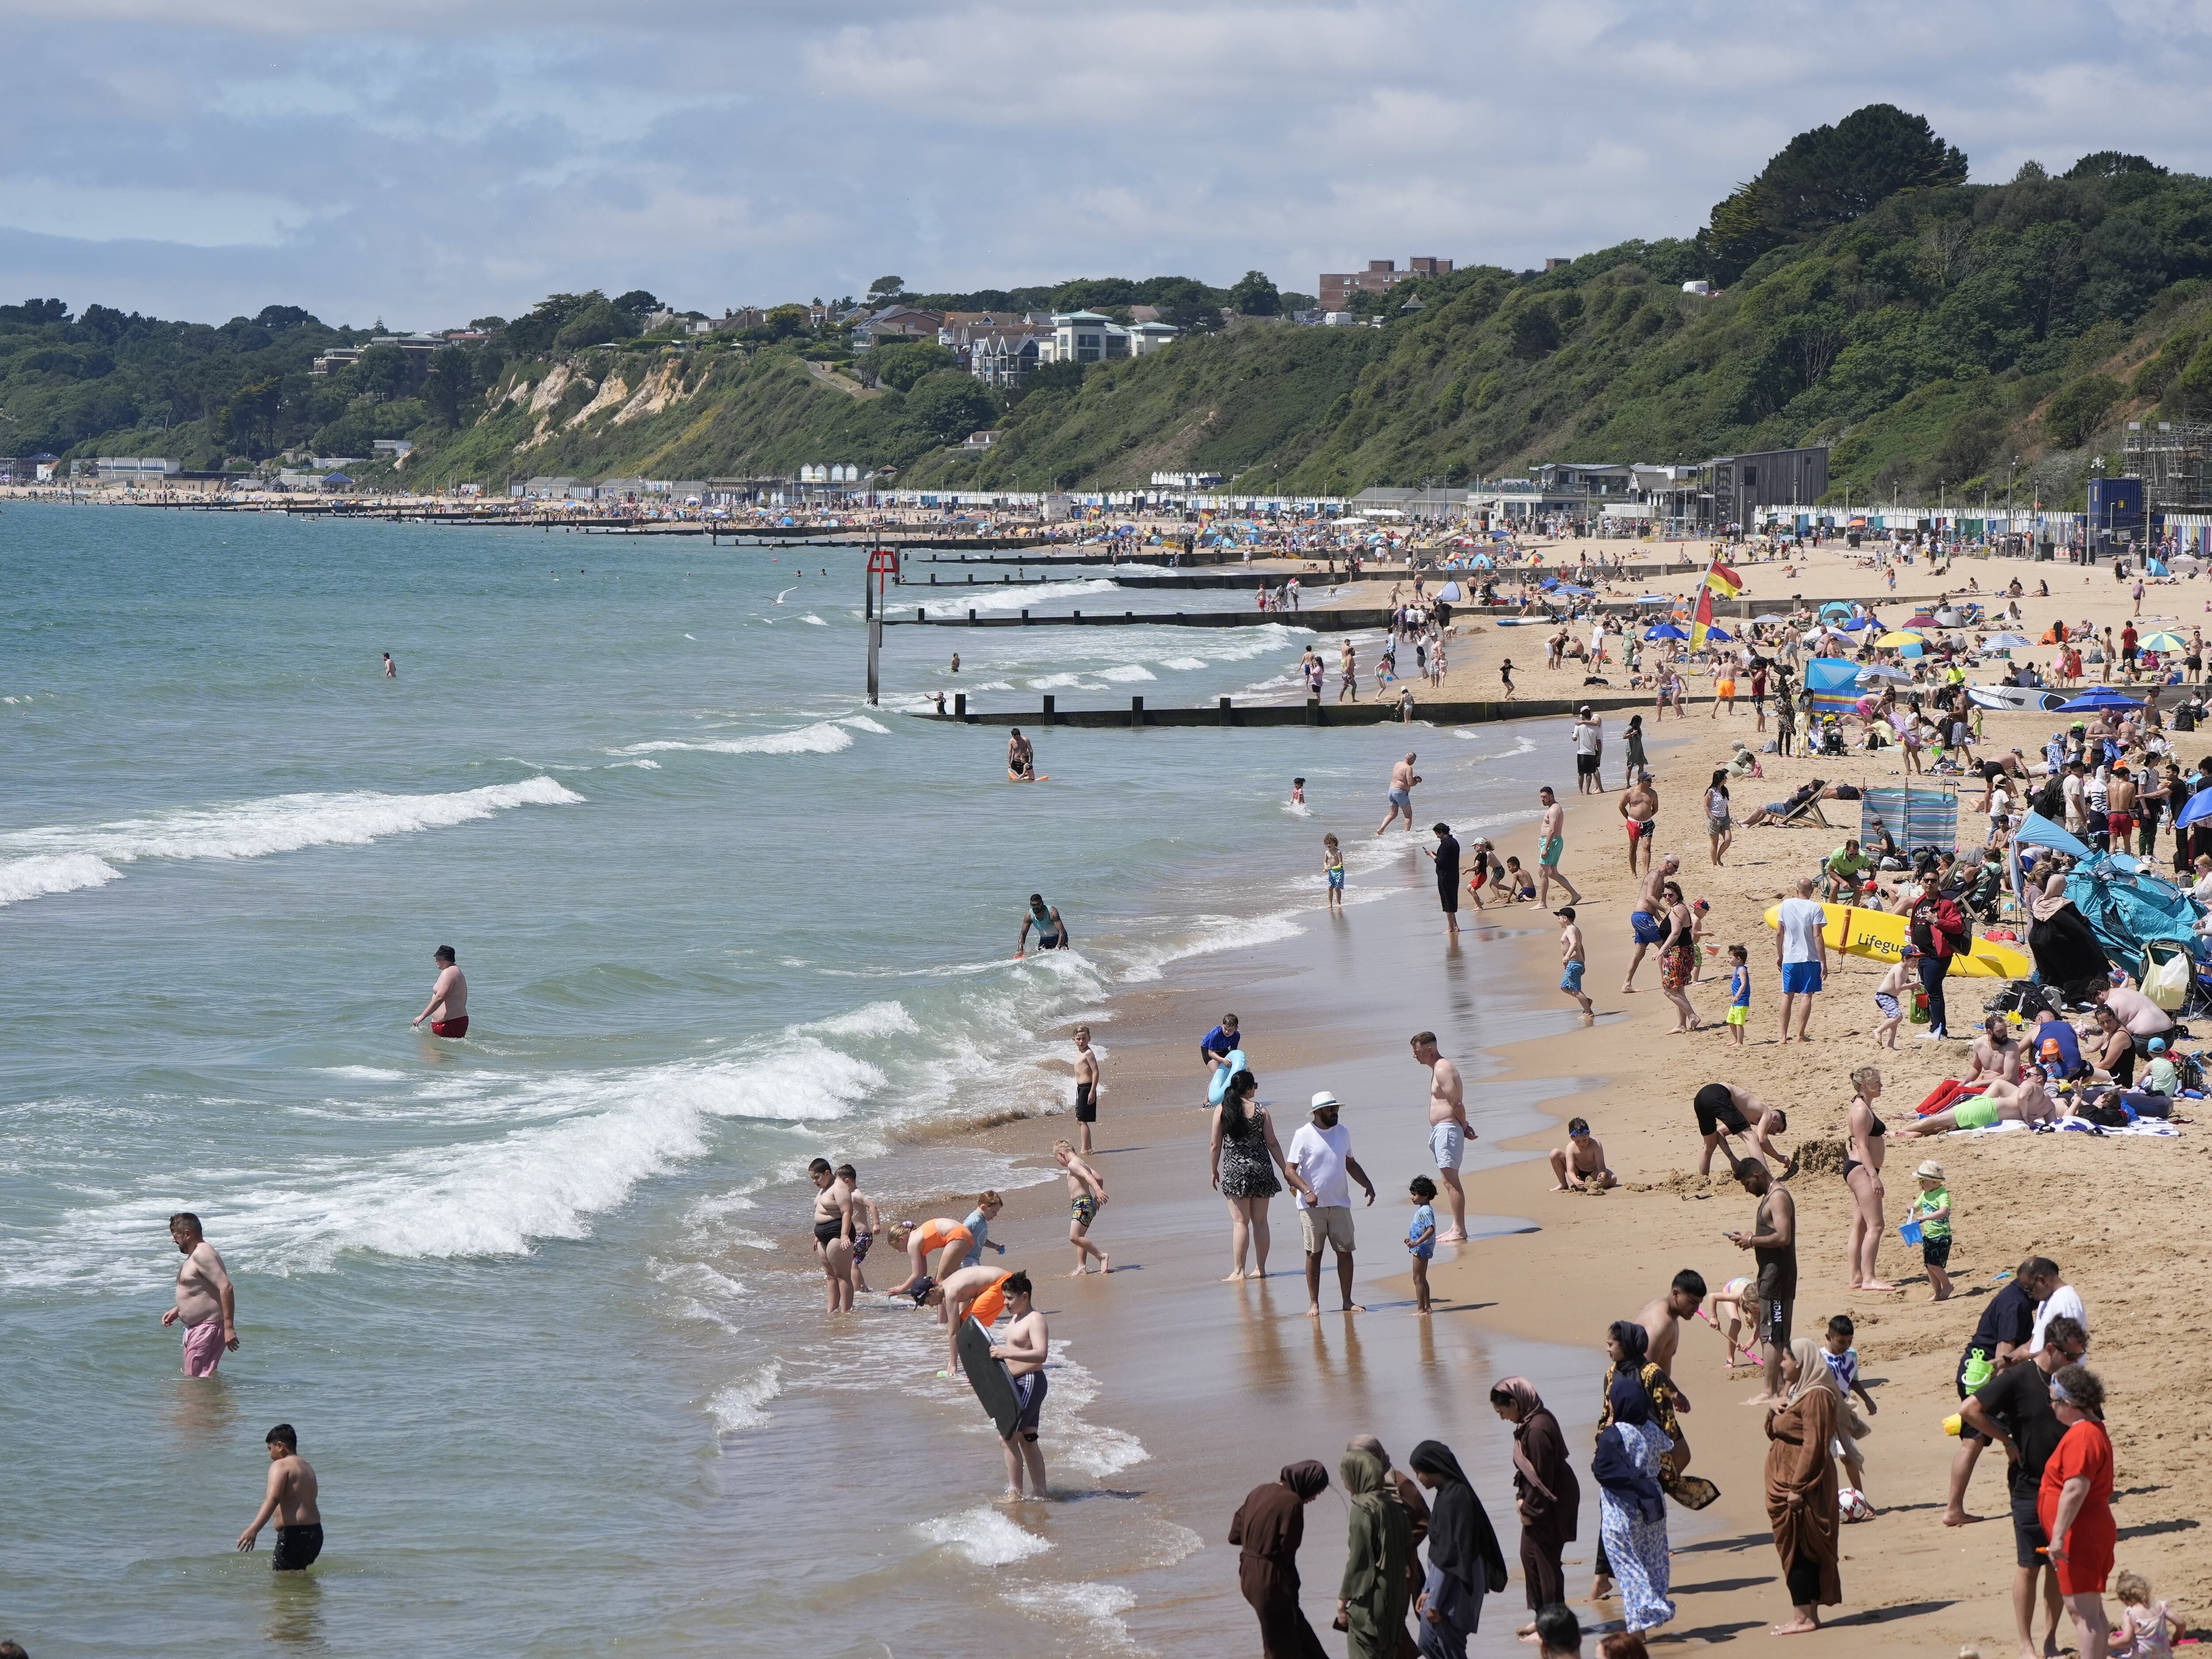 Search under way for man in water at Bournemouth Beach on hottest day of year